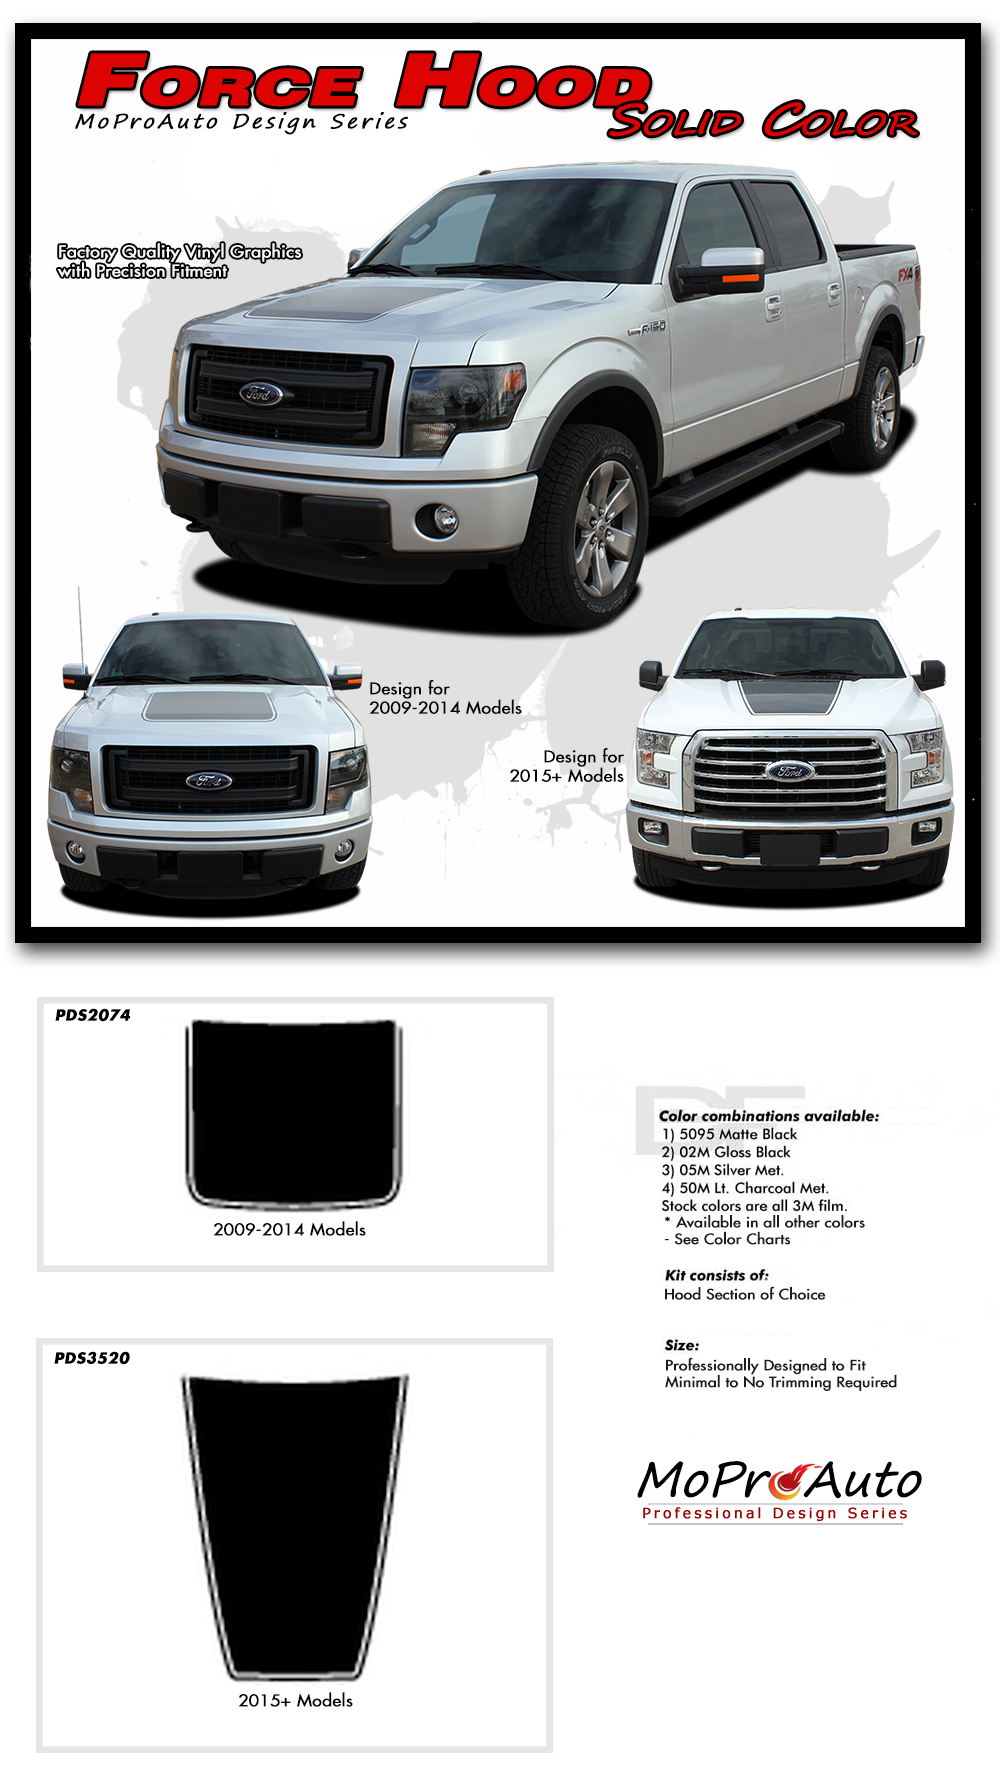 Force Hood Solid Ford F-Series F-150 Appearance Package Vinyl Graphics and Decals Kit by MoProAuto Pro Design Series